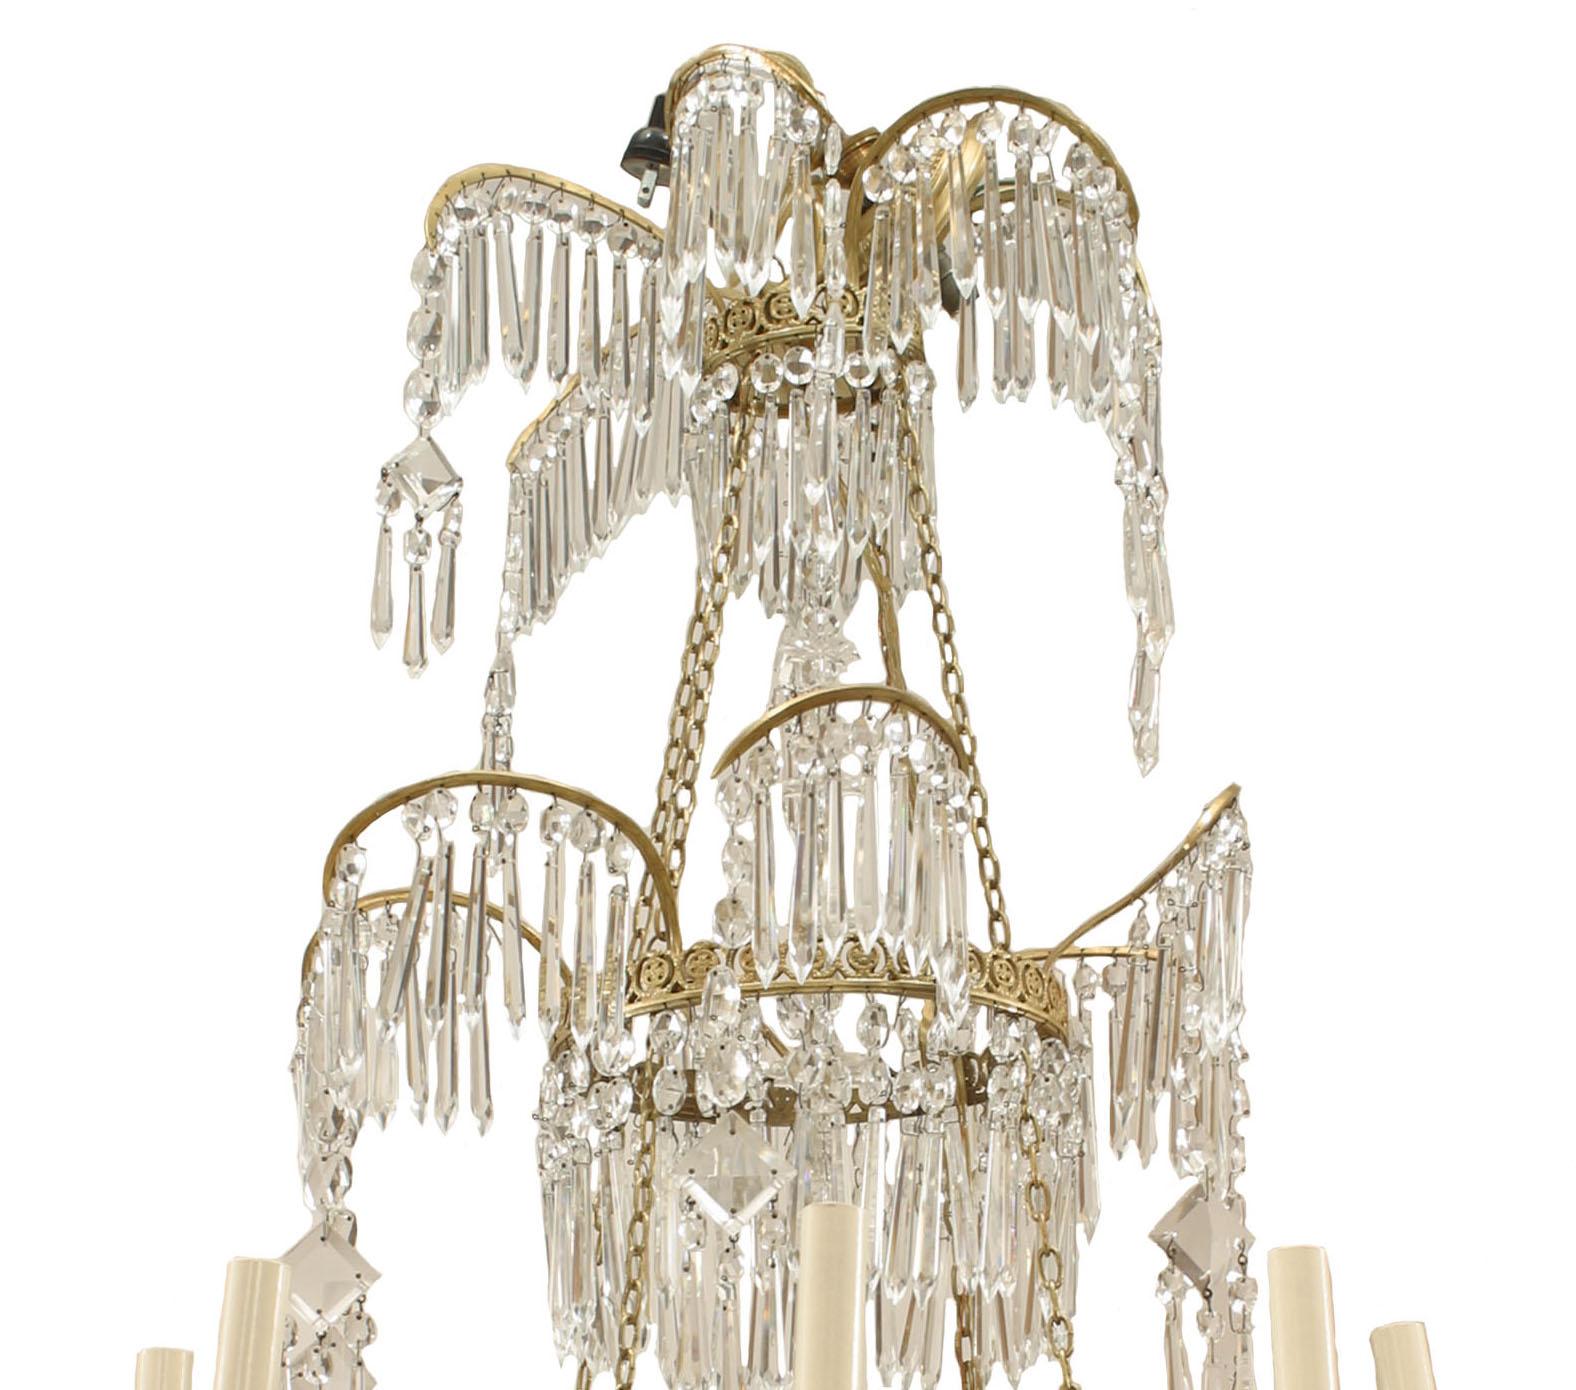 Russian (1st Quarter 19th Century) crystal & gilt bronze chandelier with 8 swirl design arms with lights emanating from a ring base below 2 smaller rings with swirl extensions
